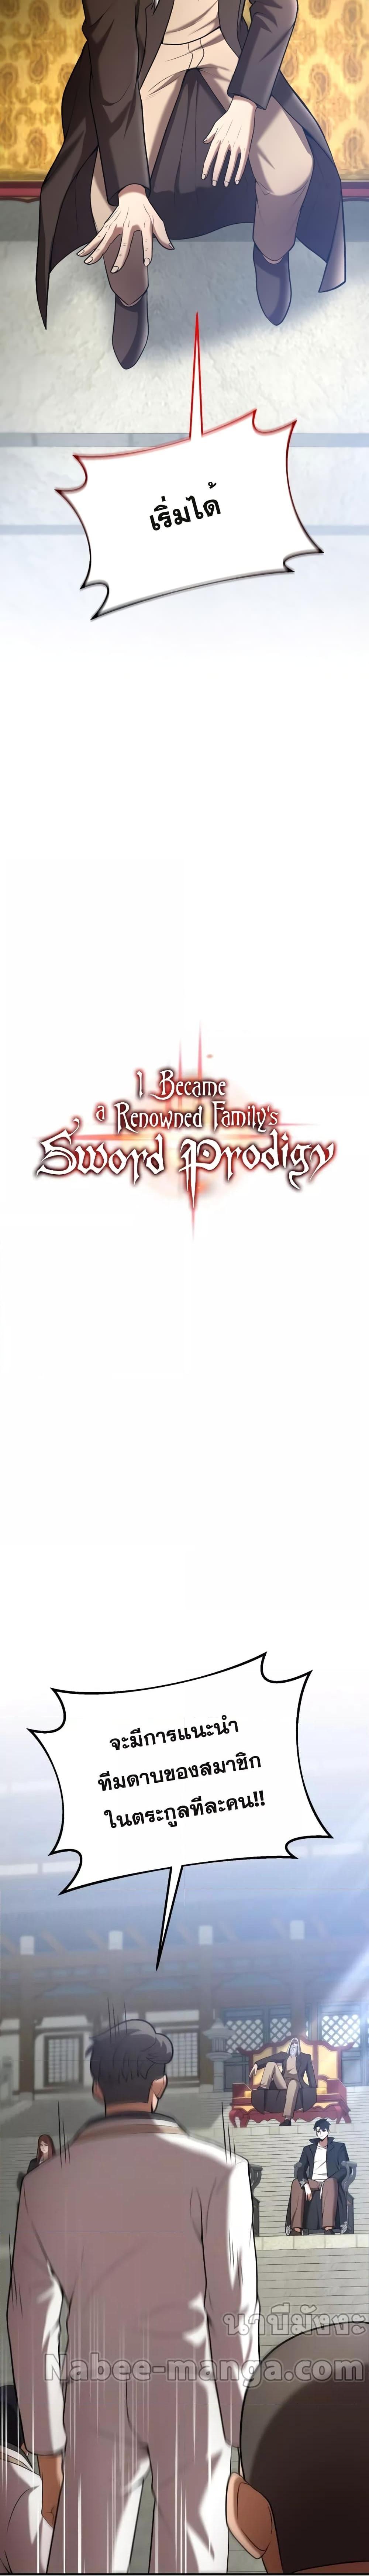 I Became a Renowned Family’s Sword Prodigy 67 07